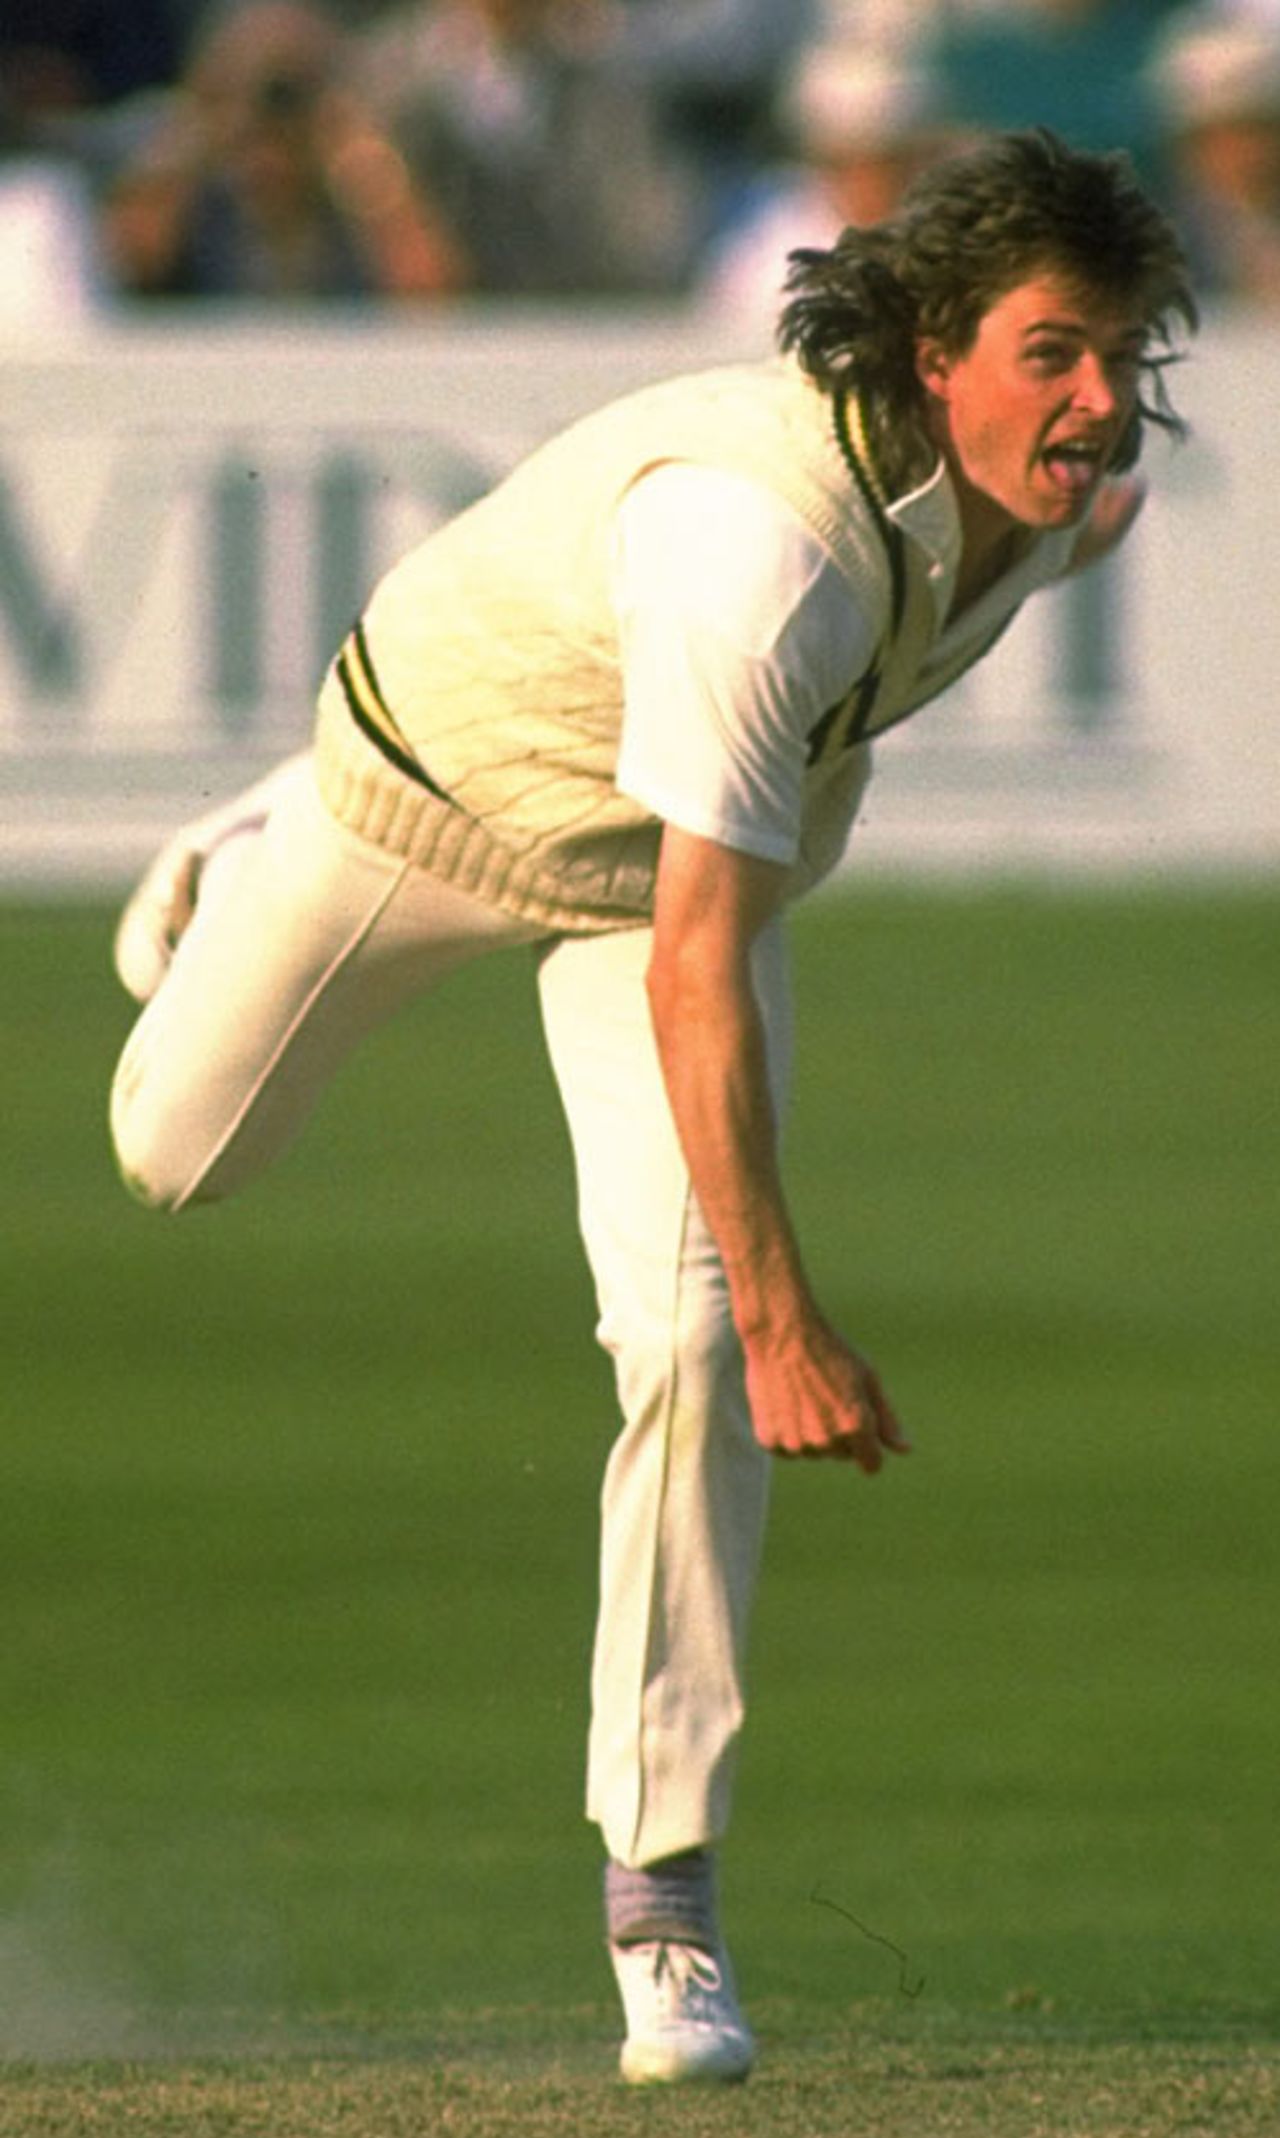 Paul Smith tears into bowl for Warwickshire, June 1, 1988